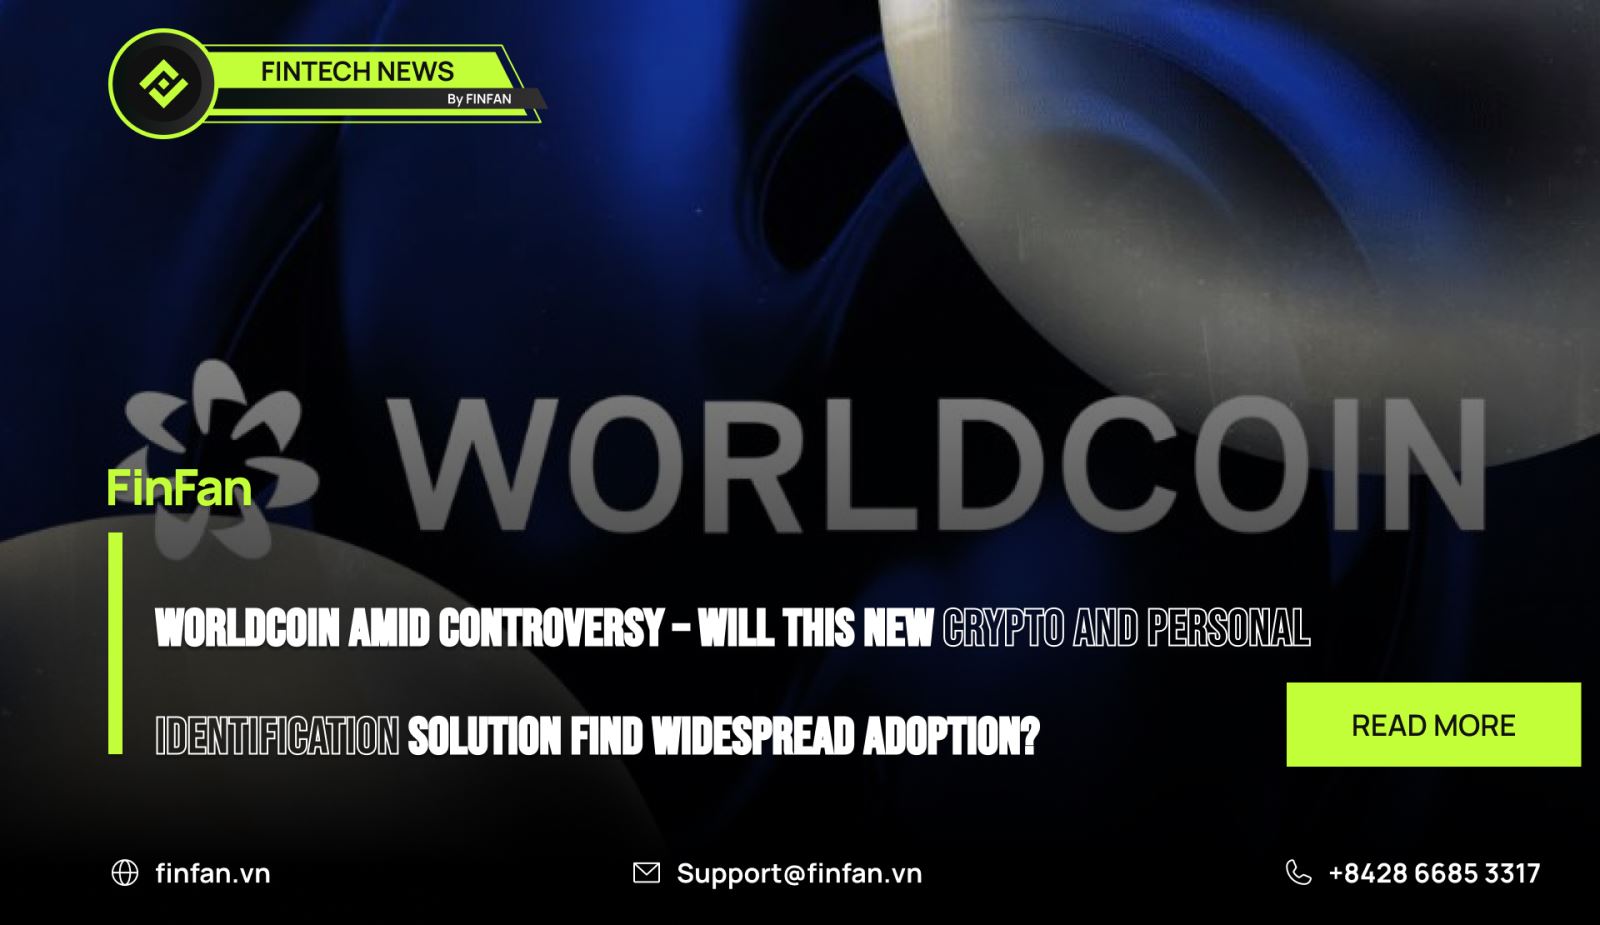 Worldcoin Amid Controversy – Will this new crypto and personal identification solution find widespread adoption?